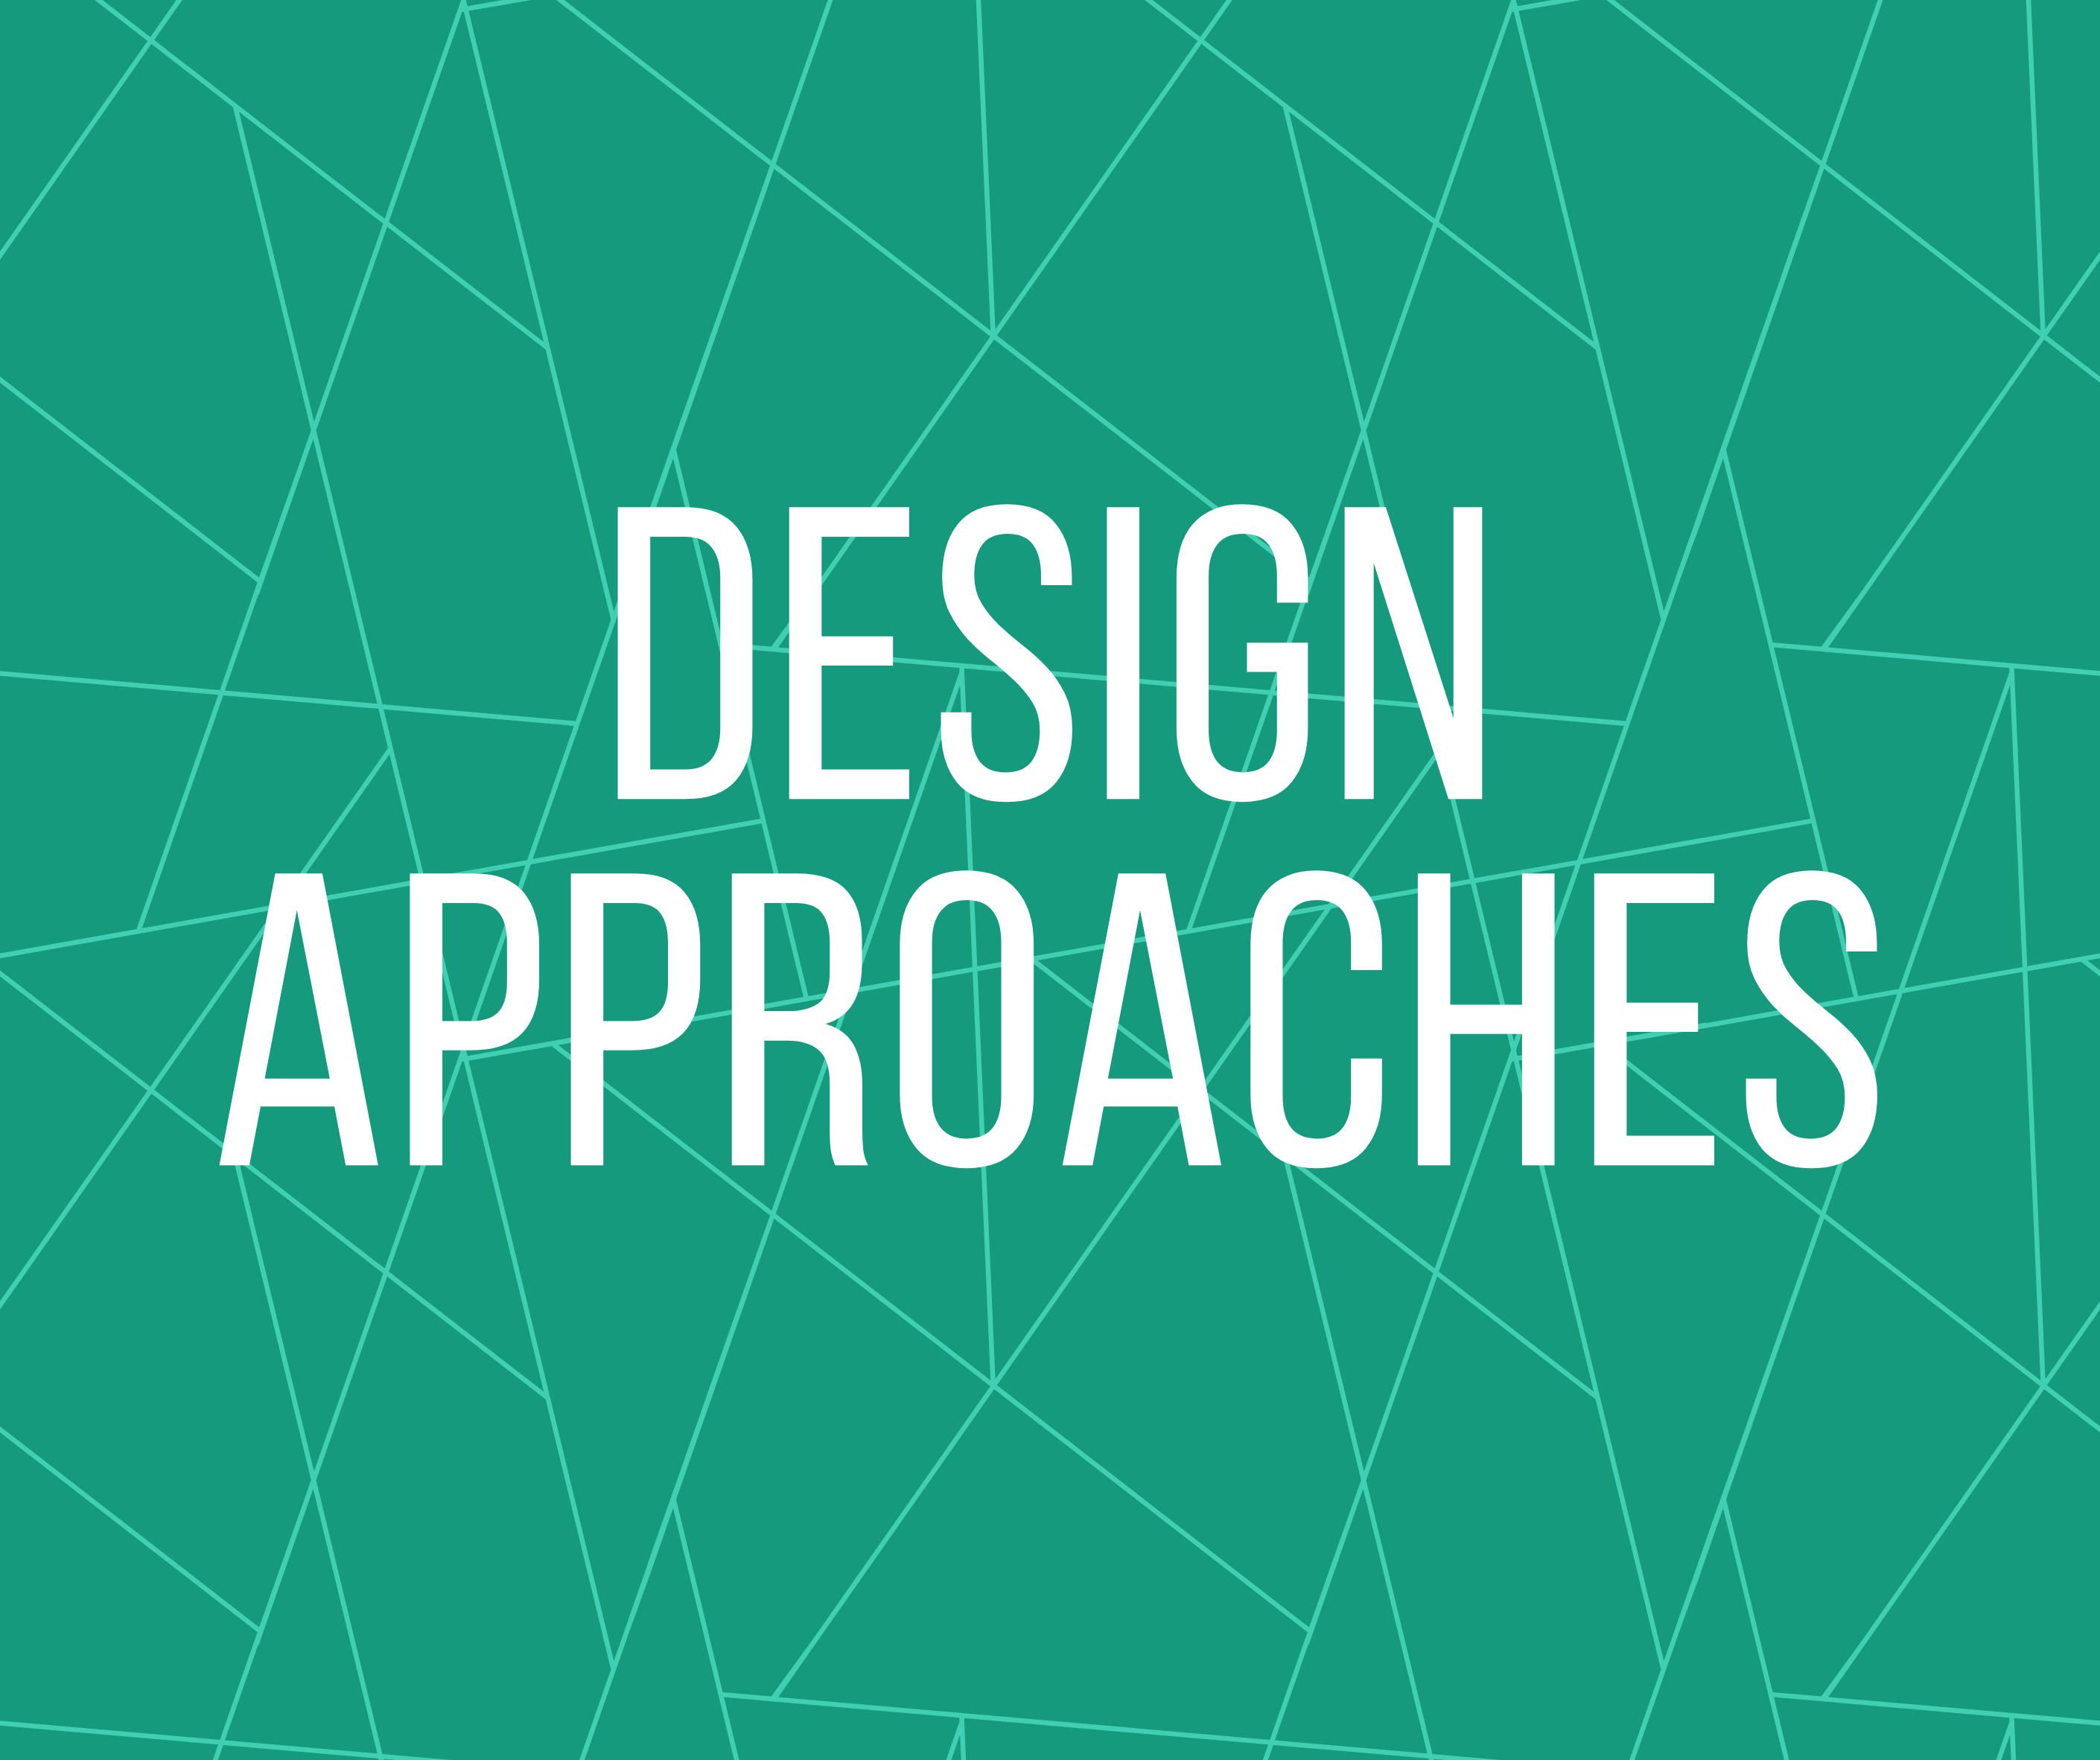 Design Approaches